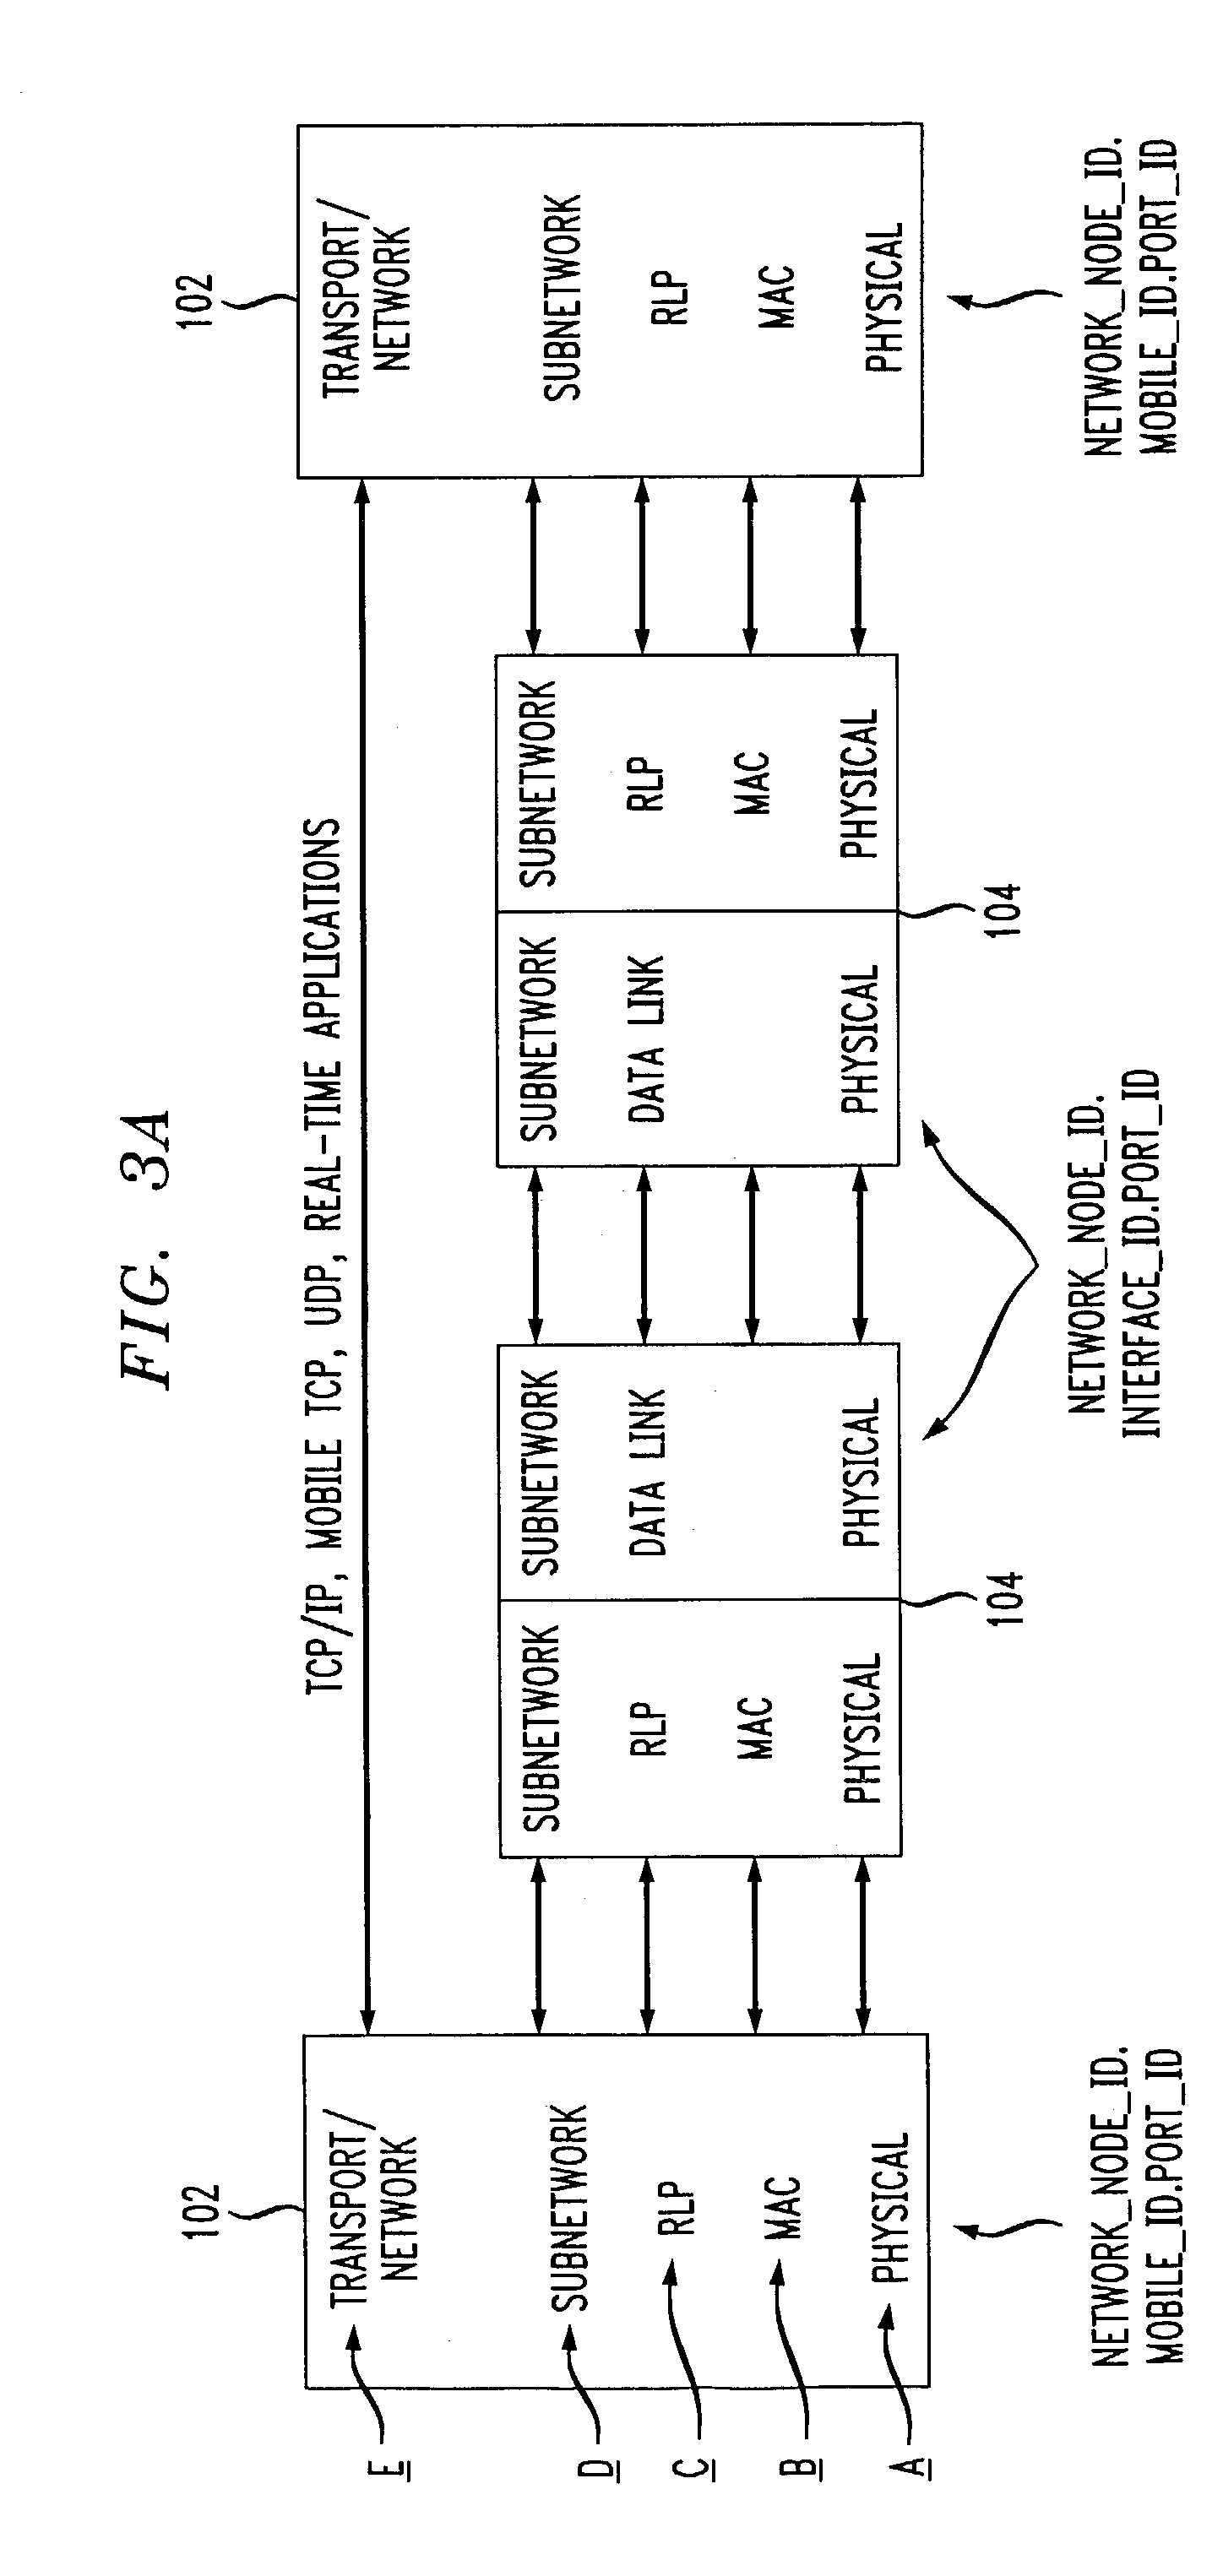 Subnetwork layer for a multimedia mobile network